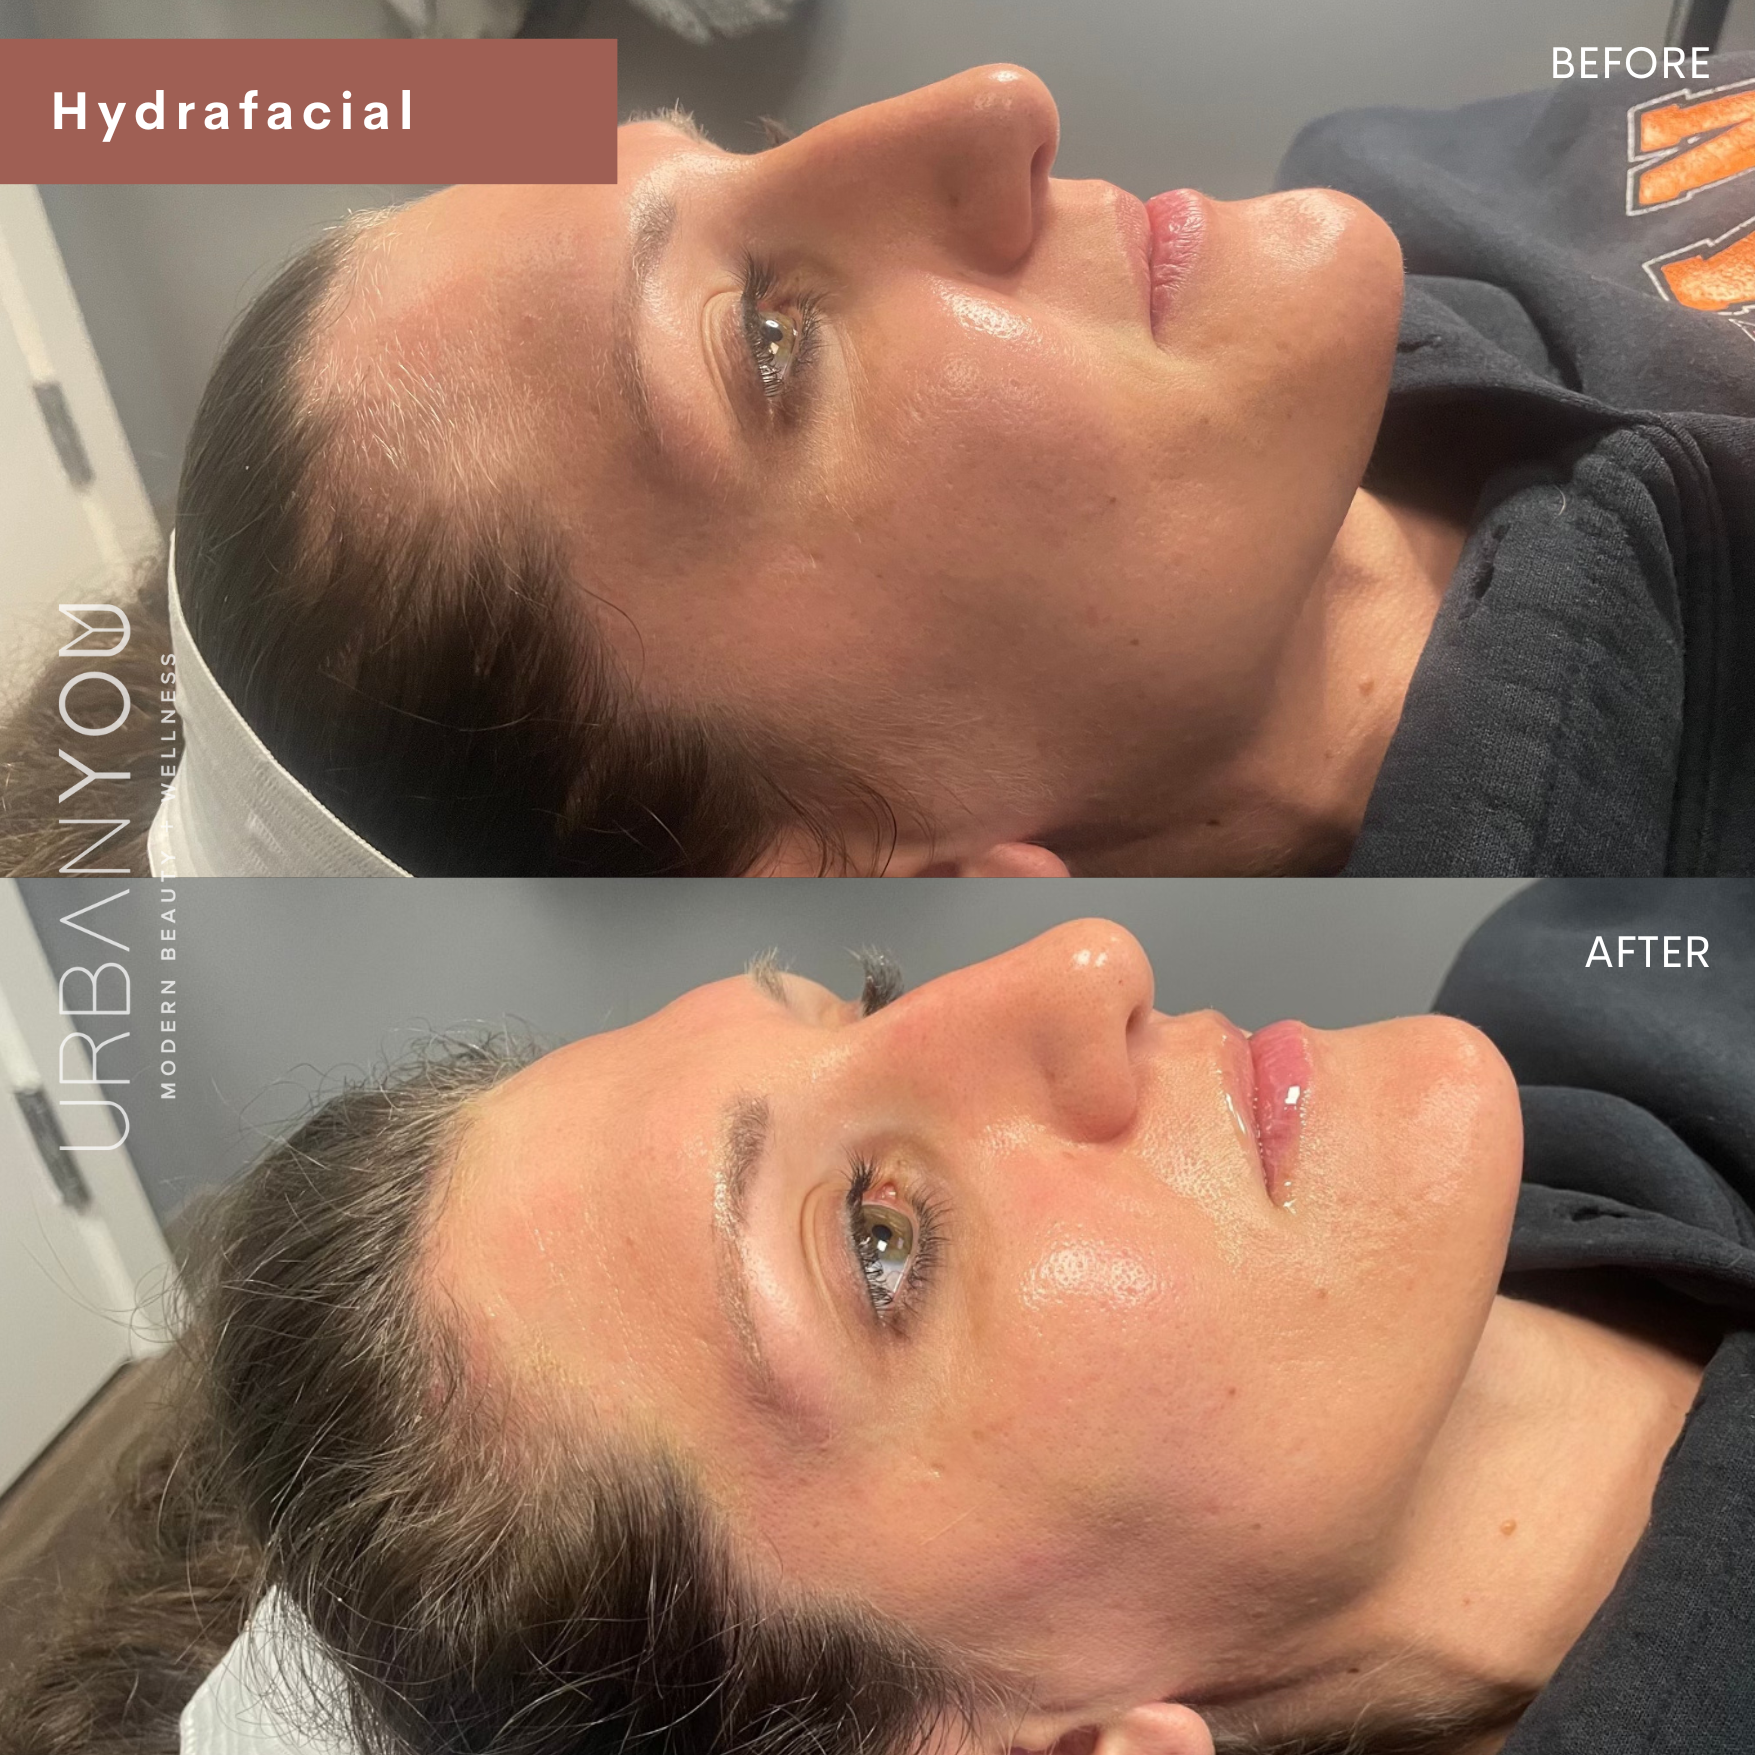 Hydrafacial before and after photo at urban you medical spa in grand rapids and northville, michigan